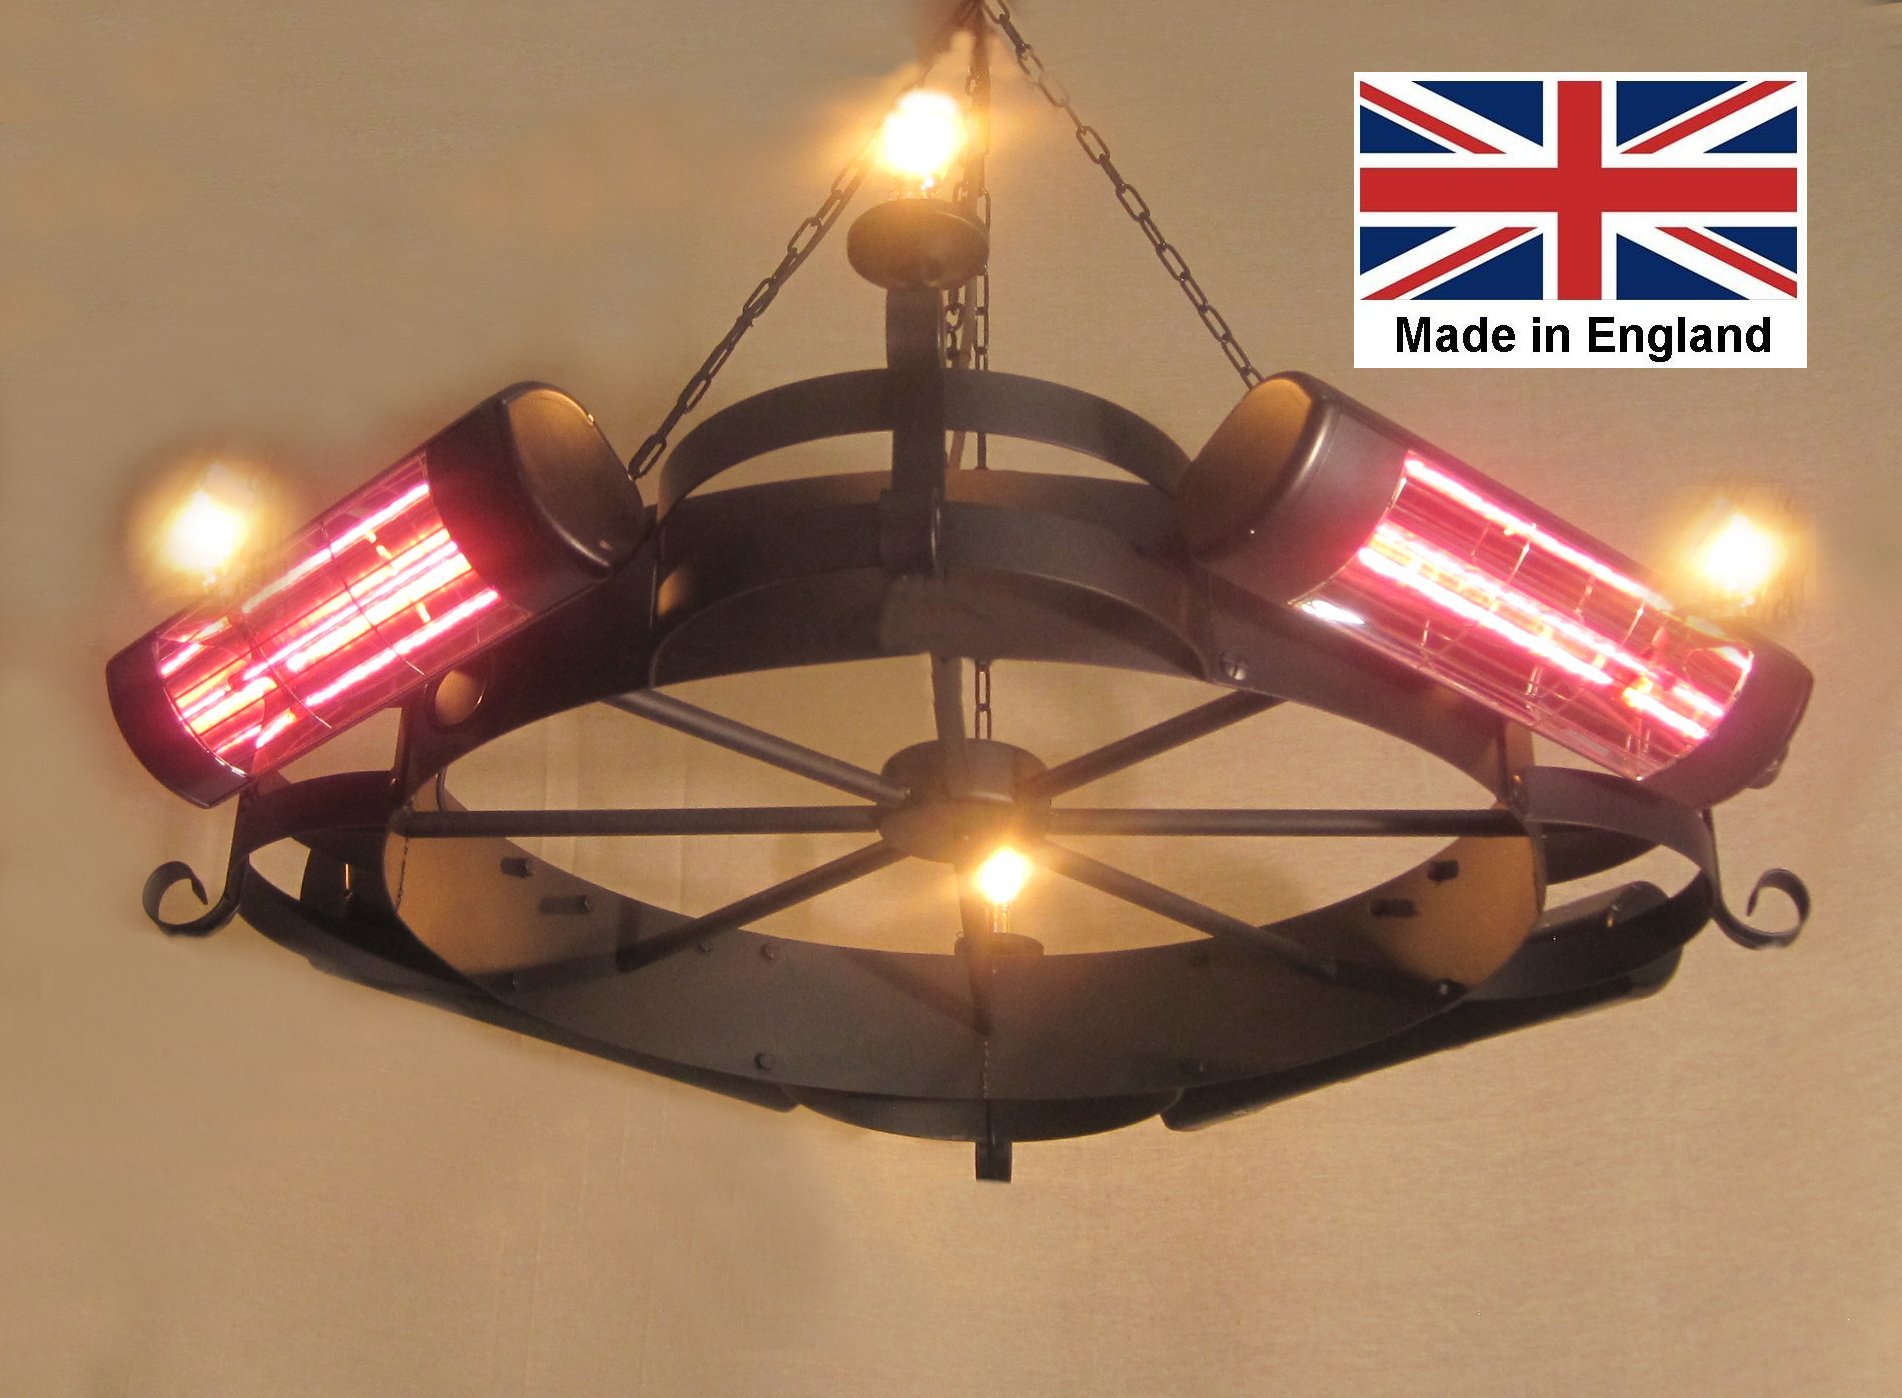 Chandelier Heater 8kW 'Willoughby' Design with Vintage Lamps